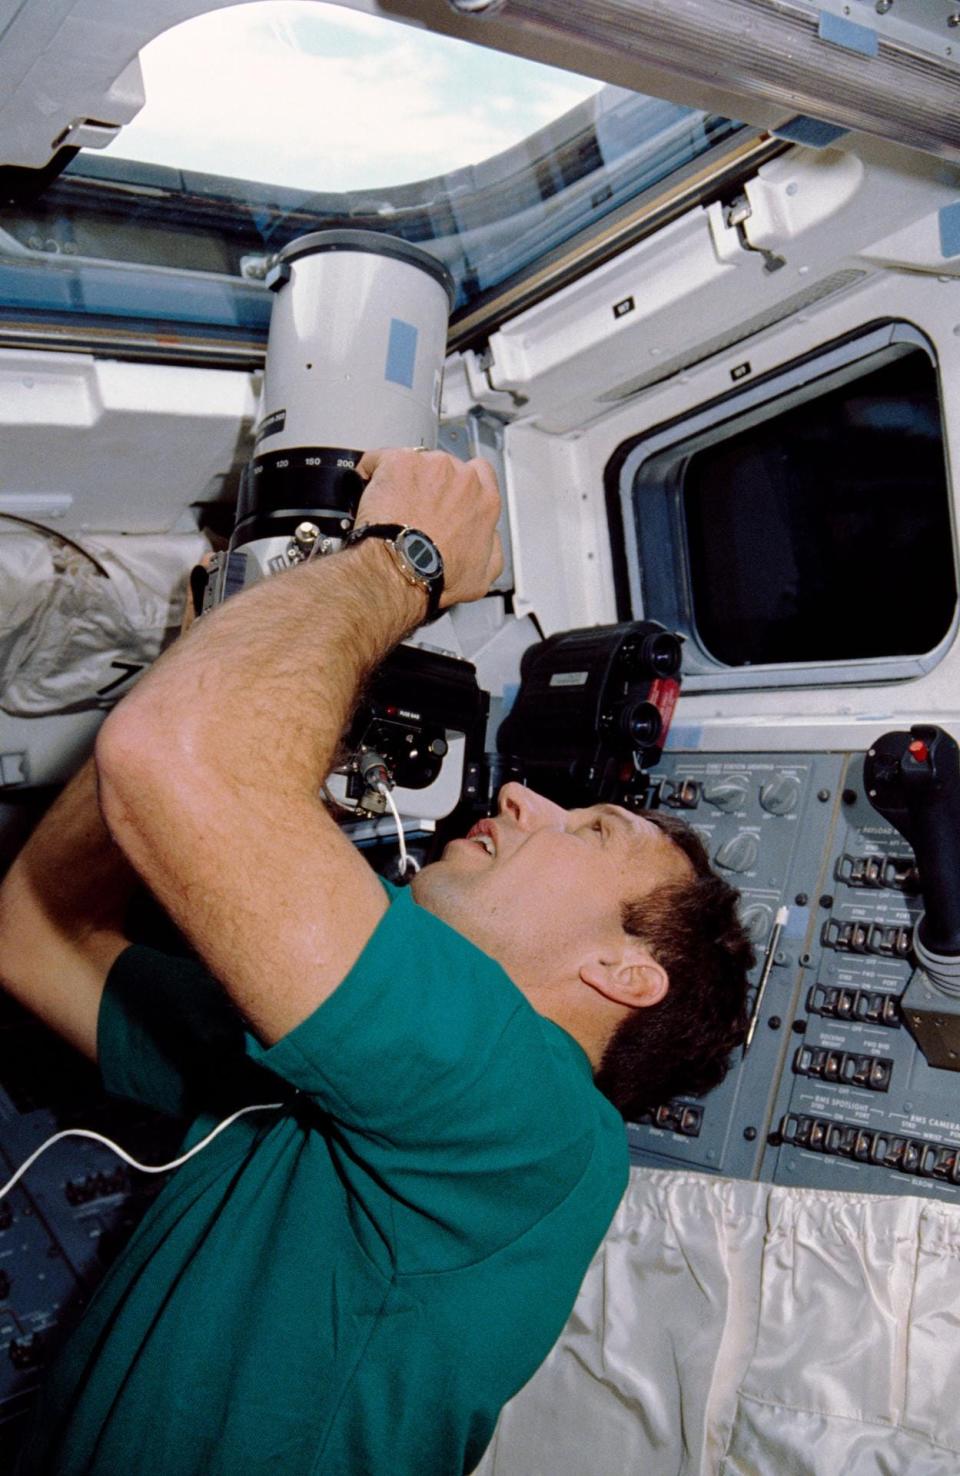 David Hilmers takes Earth imagery from the Flight Deck of Space Shuttle Atlantis during STS-36.